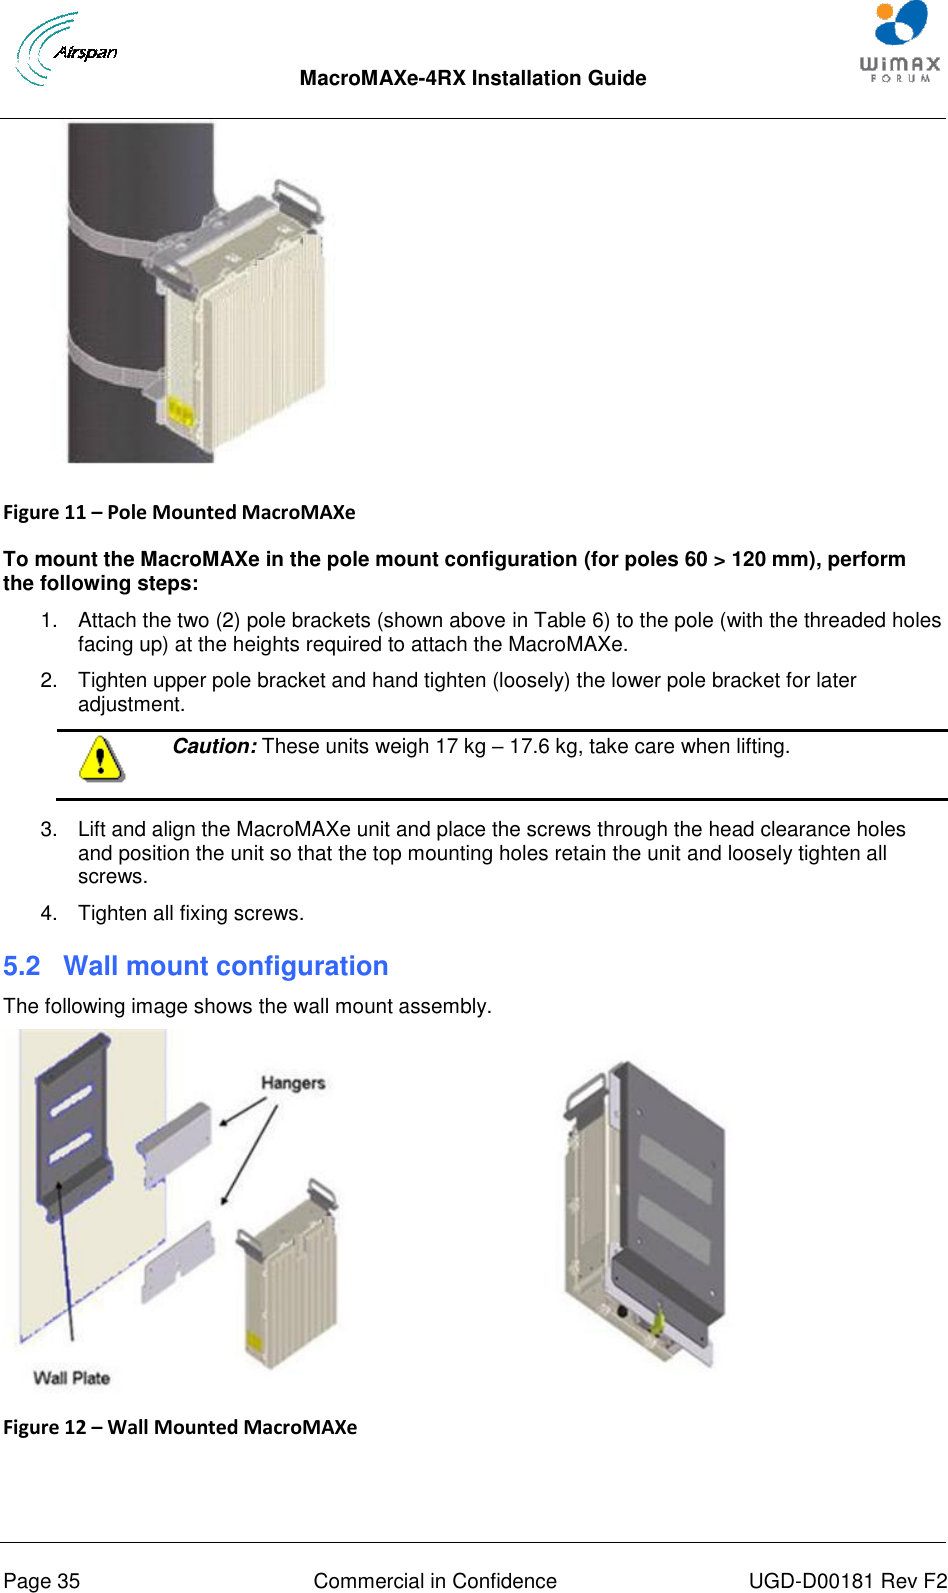  MacroMAXe-4RX Installation Guide       Page 35  Commercial in Confidence  UGD-D00181 Rev F2  Figure 11 – Pole Mounted MacroMAXe   To mount the MacroMAXe in the pole mount configuration (for poles 60 &gt; 120 mm), perform the following steps: 1.  Attach the two (2) pole brackets (shown above in Table 6) to the pole (with the threaded holes facing up) at the heights required to attach the MacroMAXe. 2.  Tighten upper pole bracket and hand tighten (loosely) the lower pole bracket for later adjustment.  Caution: These units weigh 17 kg – 17.6 kg, take care when lifting.  3.  Lift and align the MacroMAXe unit and place the screws through the head clearance holes and position the unit so that the top mounting holes retain the unit and loosely tighten all screws. 4.  Tighten all fixing screws. 5.2  Wall mount configuration The following image shows the wall mount assembly.  Figure 12 – Wall Mounted MacroMAXe   